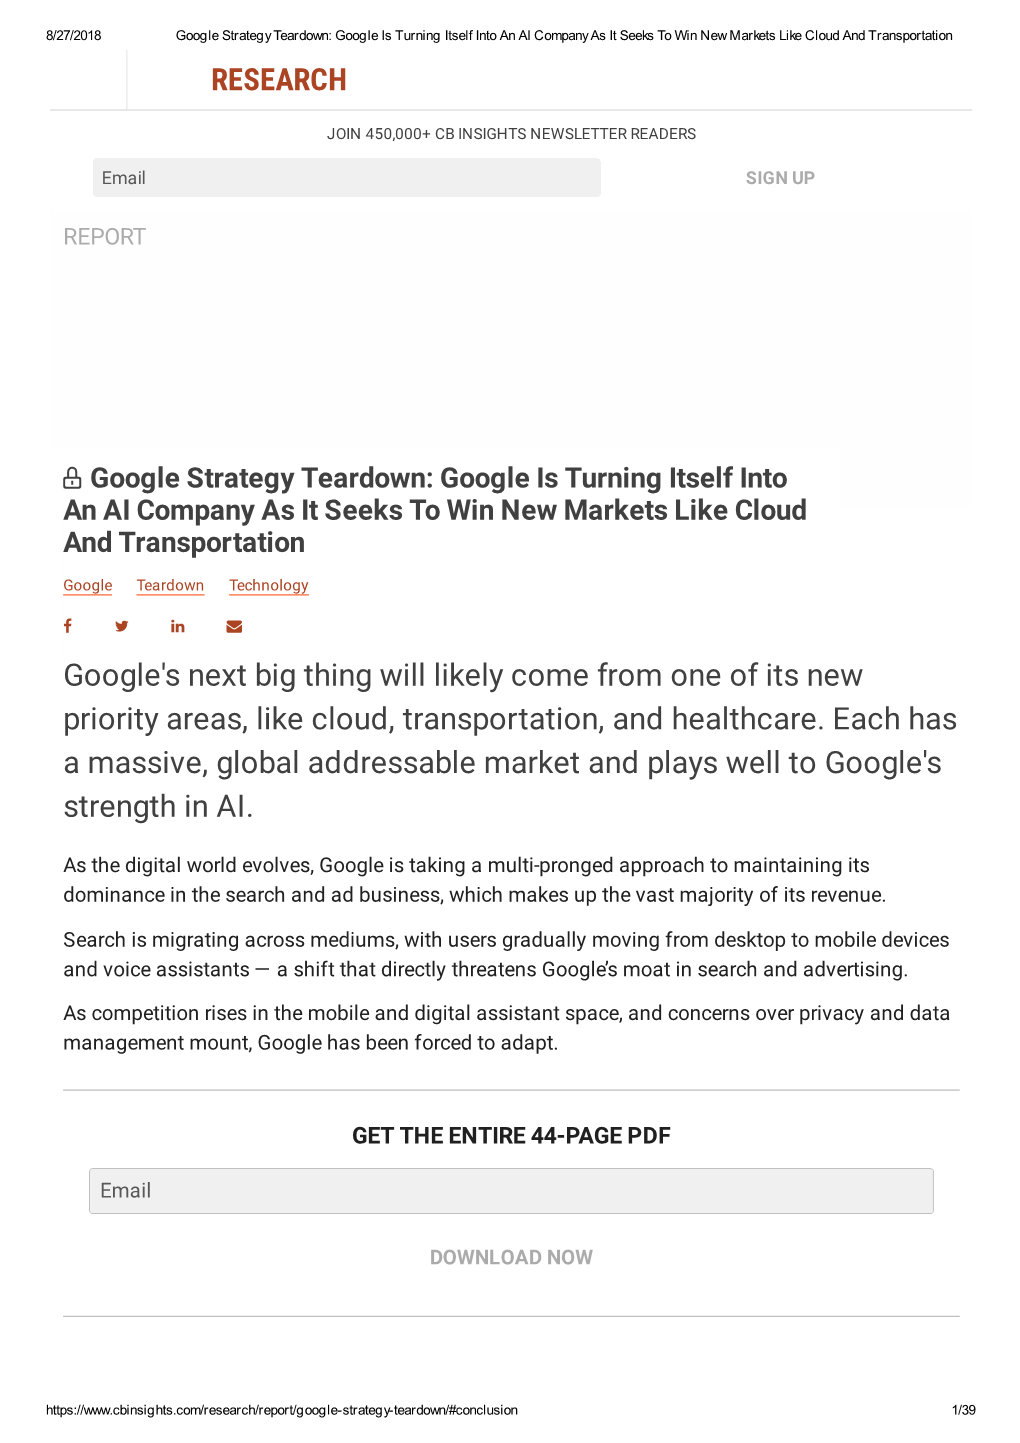 Google Strategy Teardown: Google Is Turning Itself Into an AI Company As It Seeks to Win New Markets Like Cloud and Transportation RESEARCH